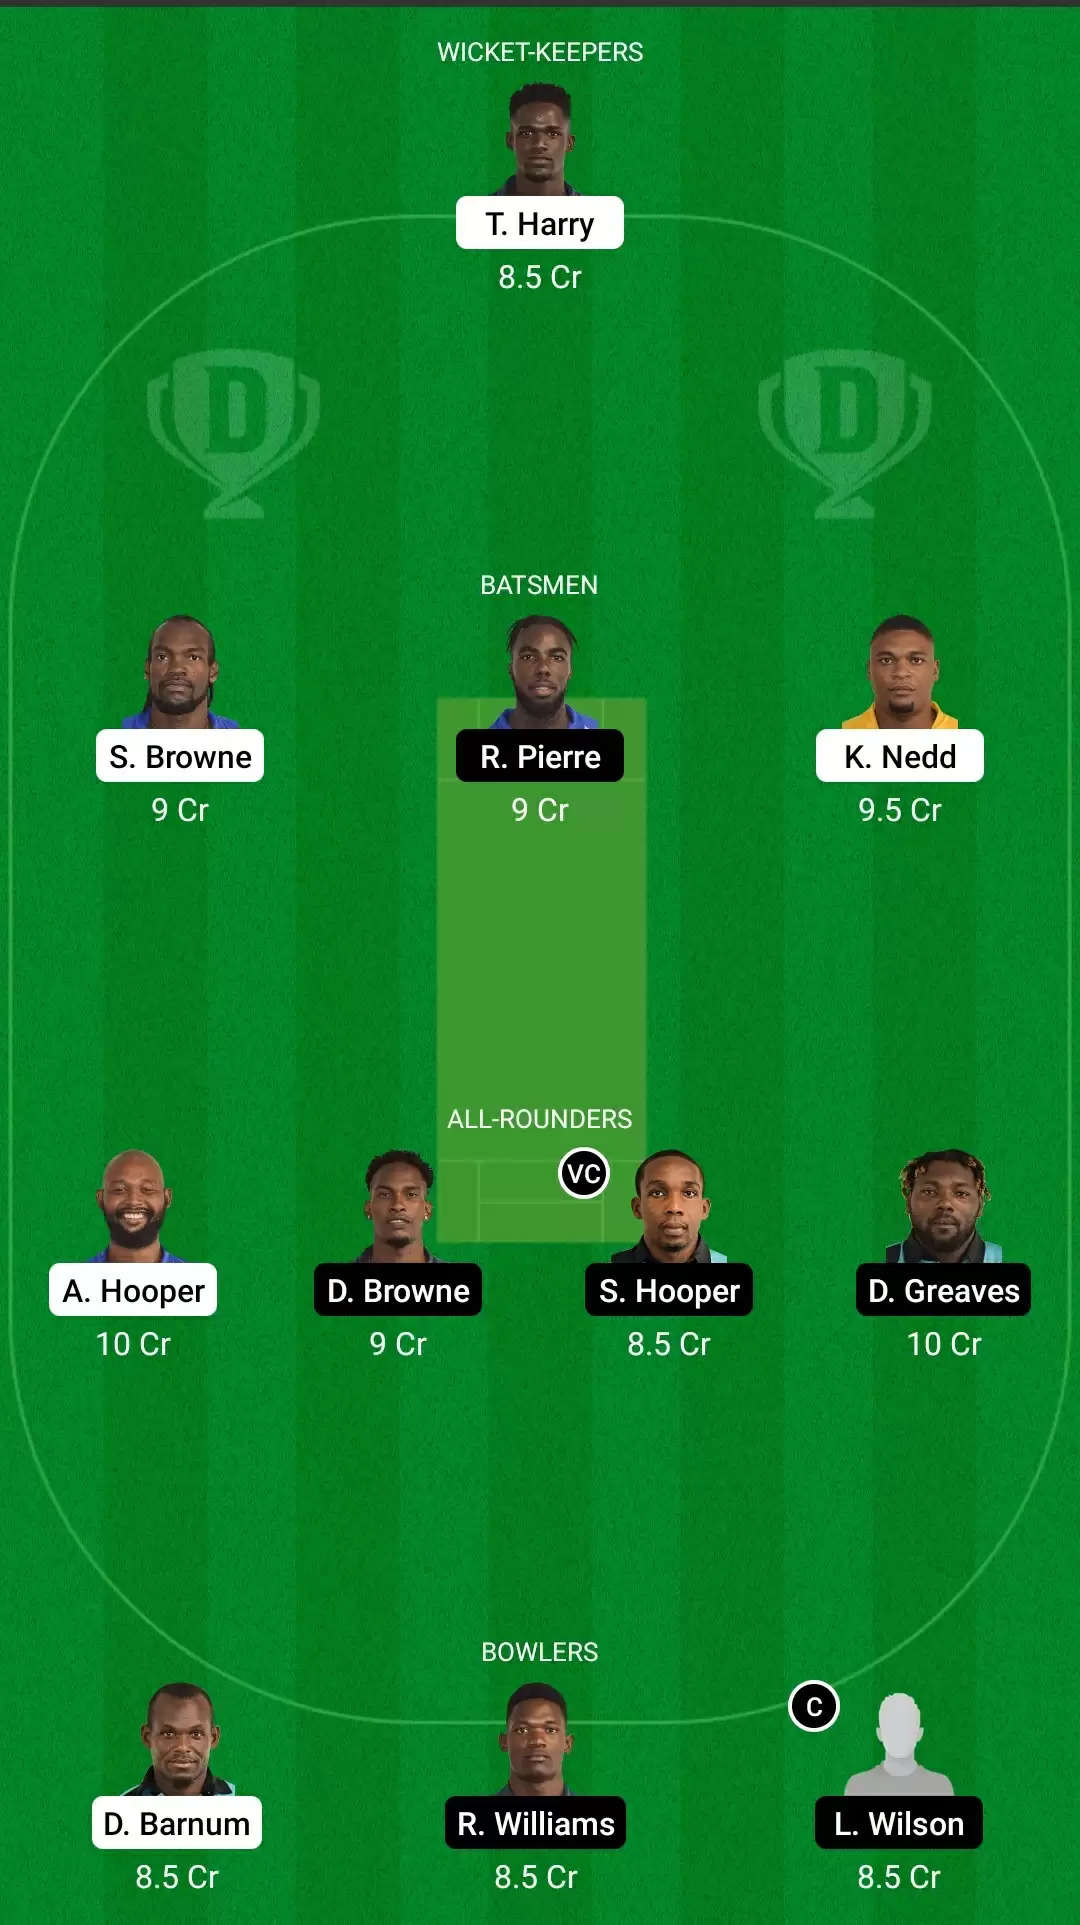 Vincy Premier League 2021, Match 12: SPB vs LSH Dream11 Prediction, Fantasy Cricket Tips, Team, Playing 11, Pitch Report, Weather Conditions and Injury Update